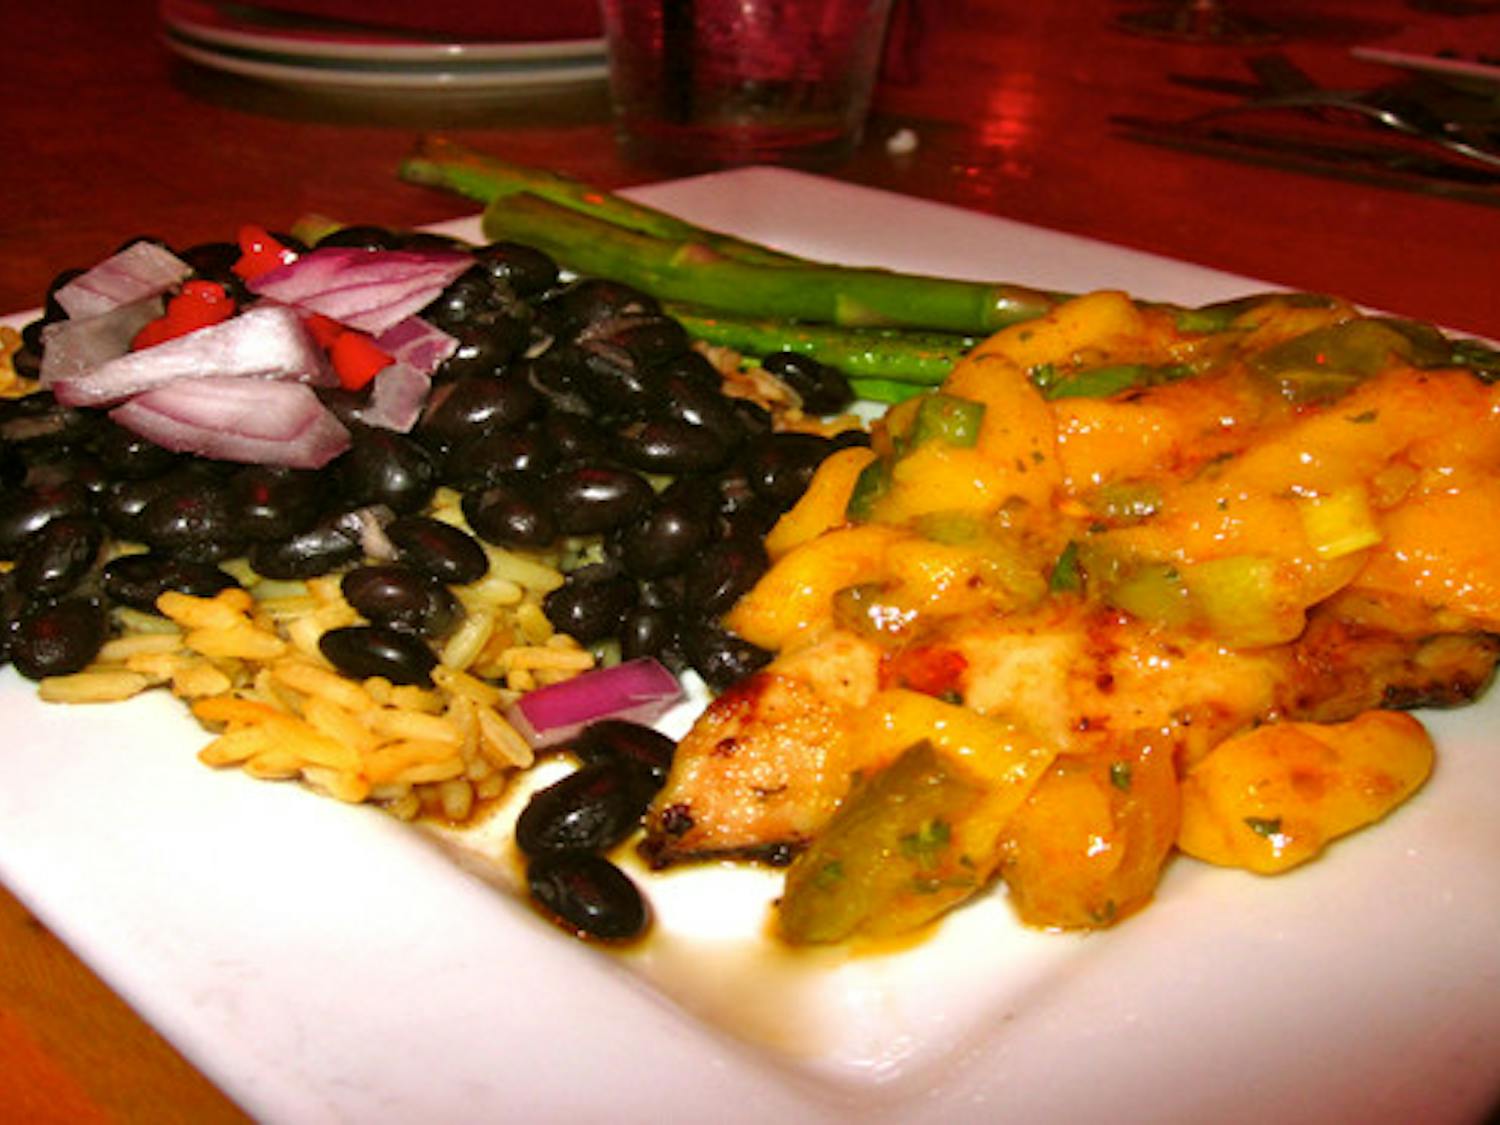 Chicken with spicy mango jalapeño salsa, black beans over Spanish rice and asparagus.